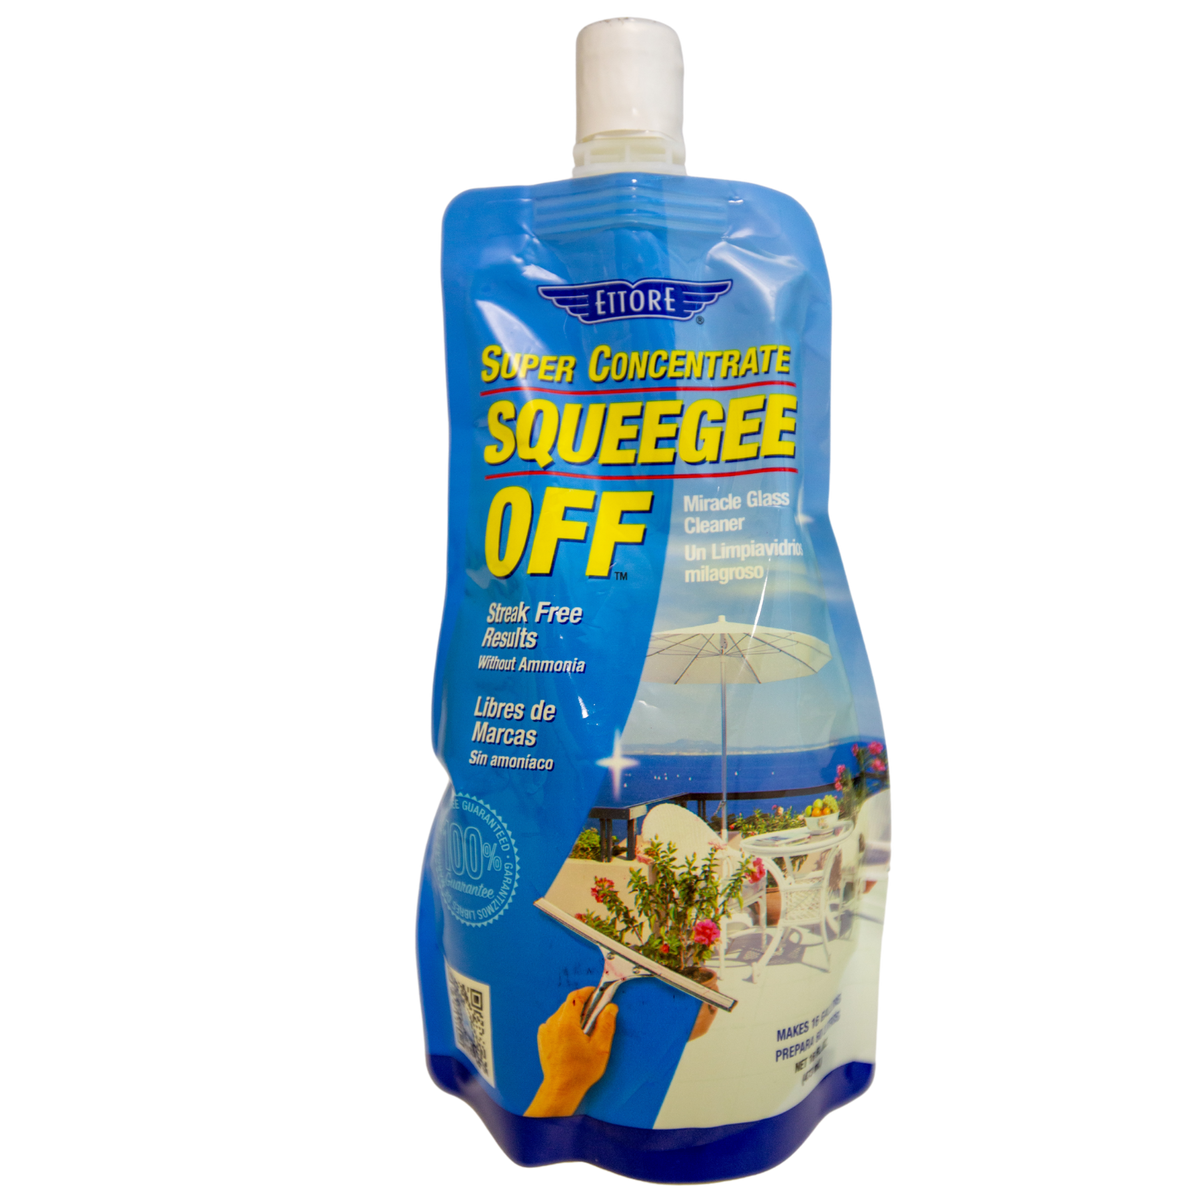 Squeegee shine window cleaner concentrate